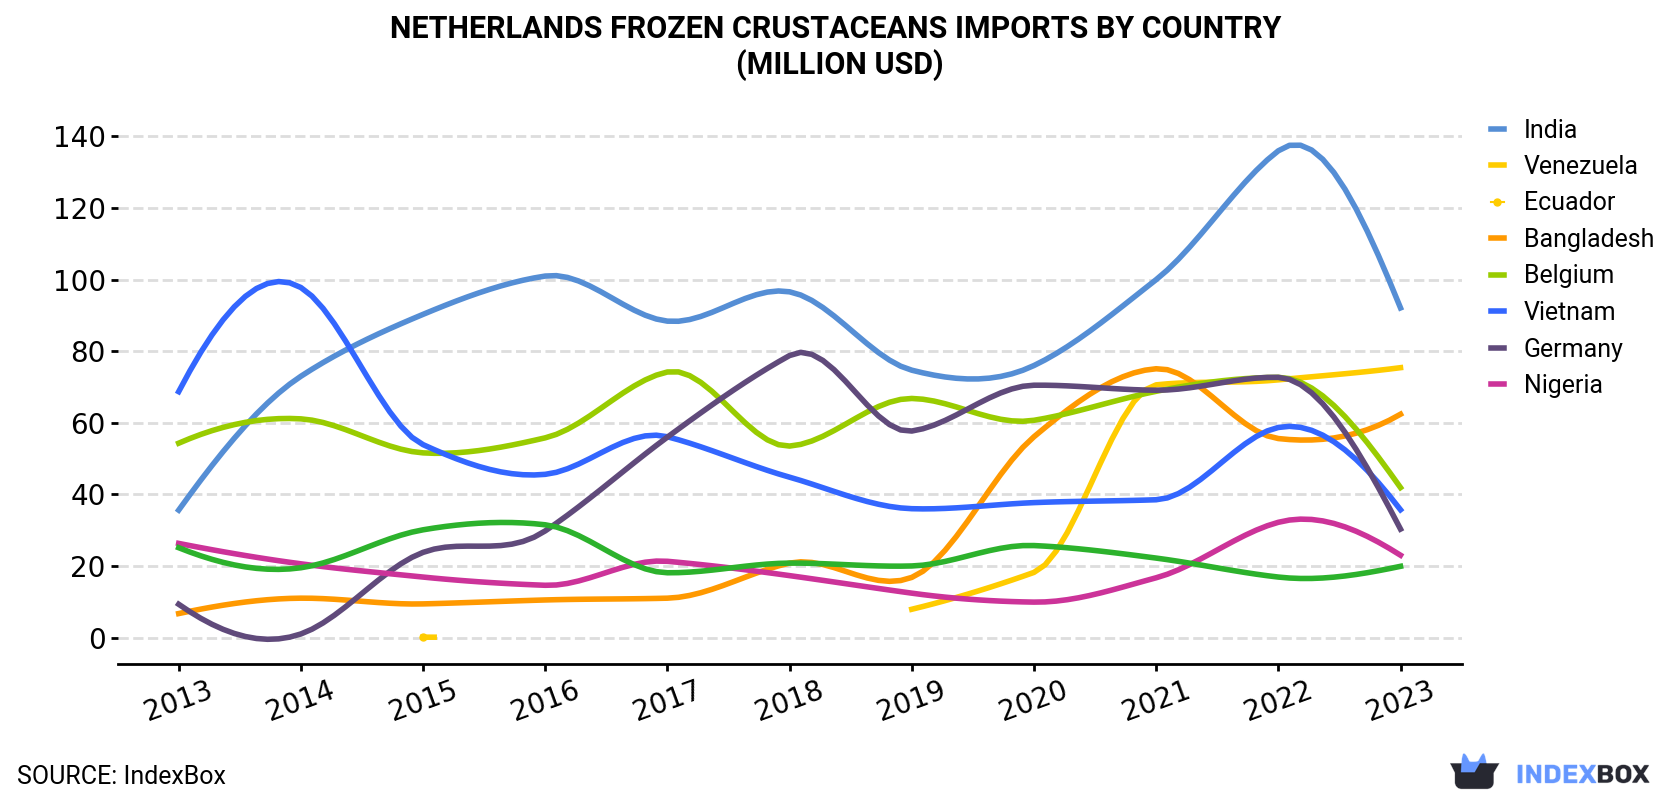 Netherlands Frozen Crustaceans Imports By Country (Million USD)